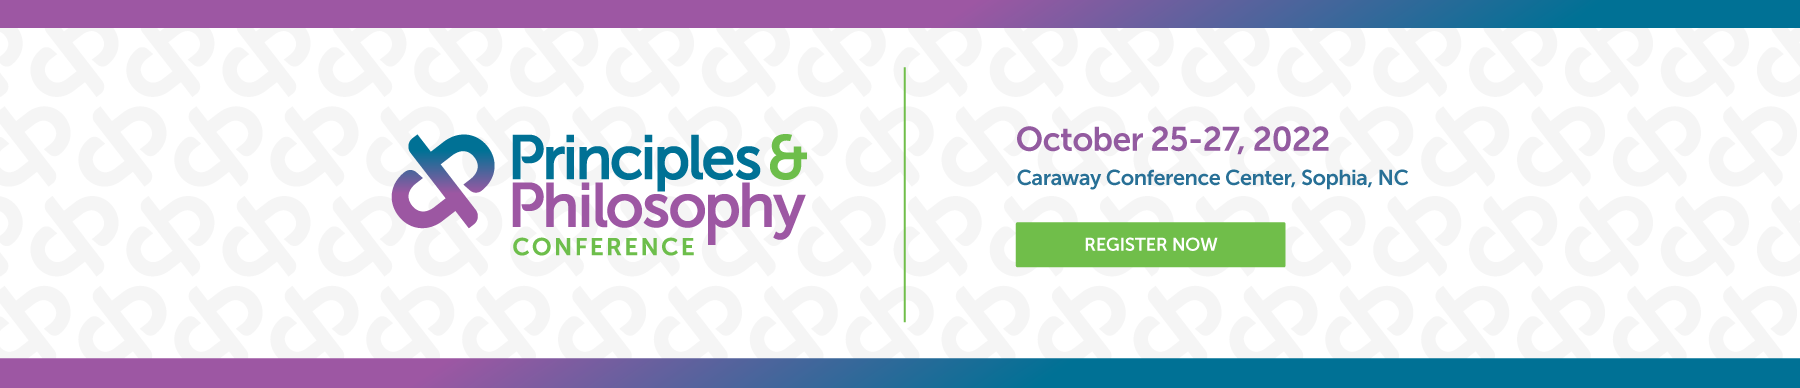 Principles & Philosophy Conference - October 25-27, 2022 Carraway Conference Center, Sophia, NC - Register Now